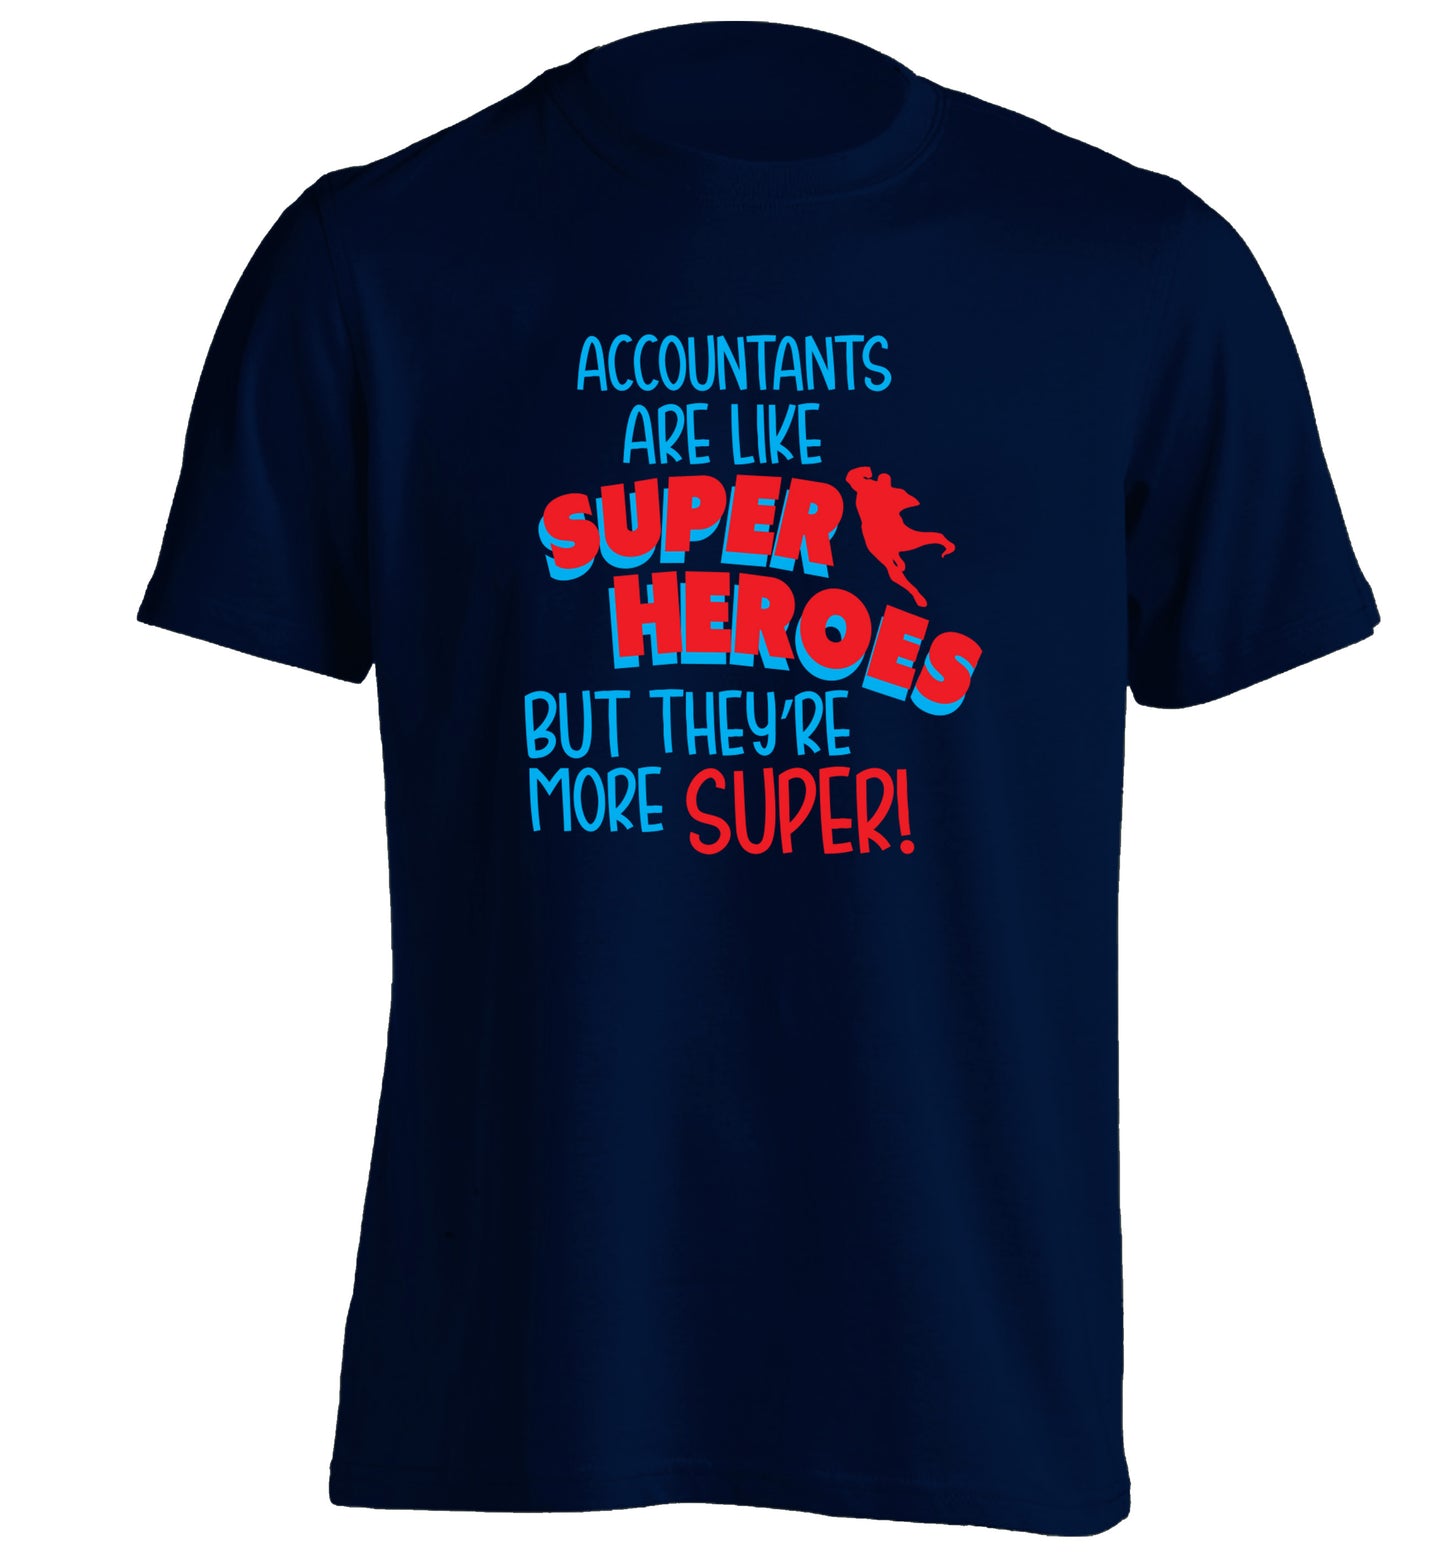 Accountants are like superheroes but they're more super adults unisex navy Tshirt 2XL